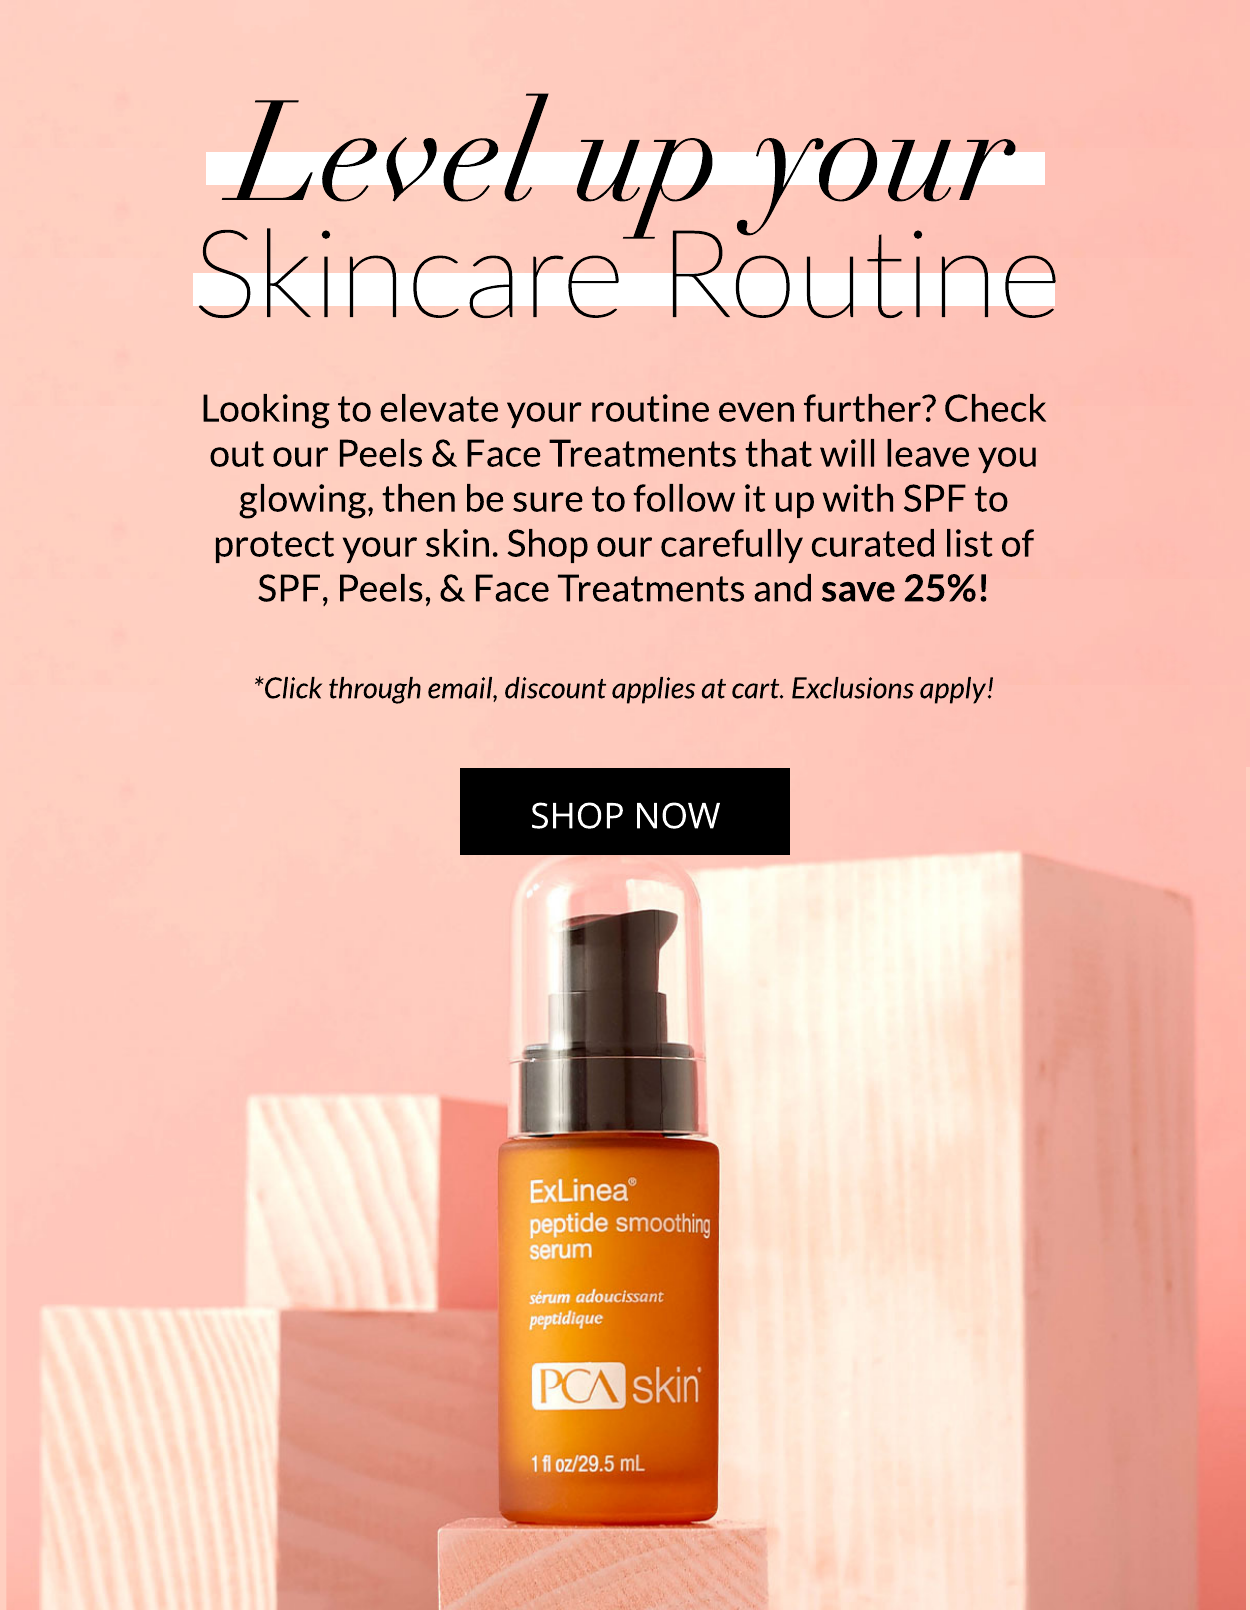 Save 25% on SPF, Peels and Treatments